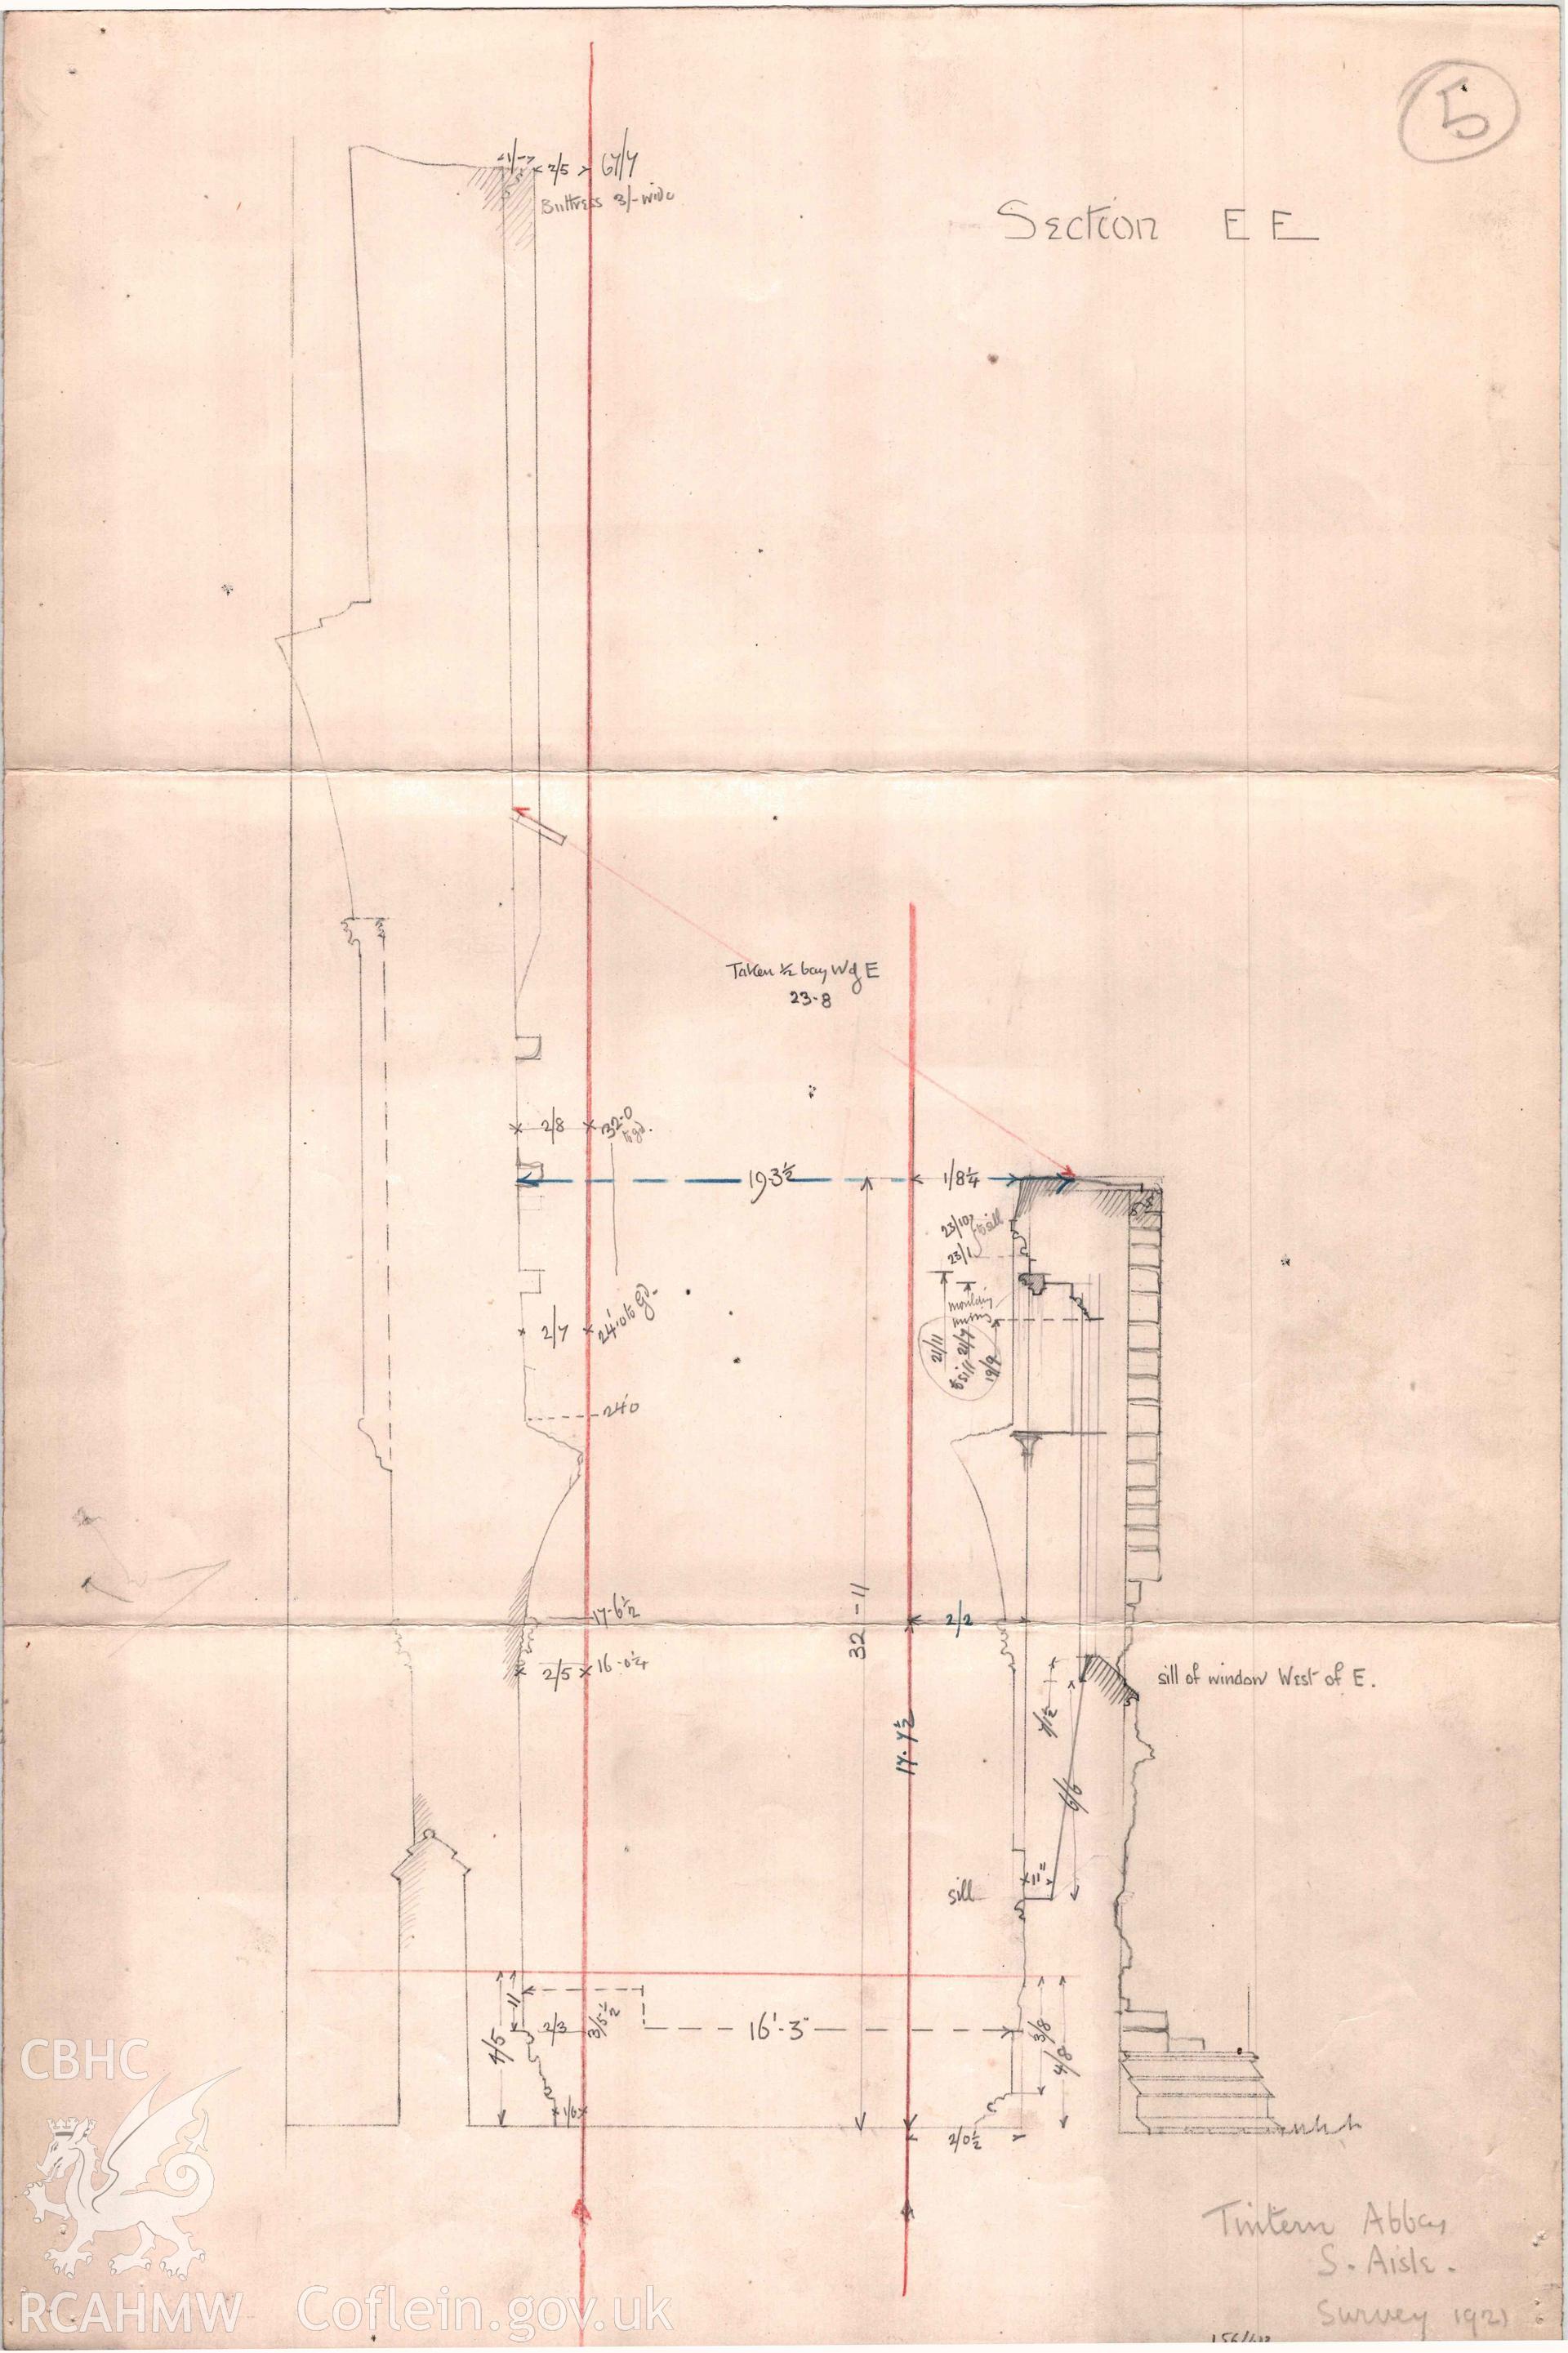 Cadw Guardianship monument drawing, one of 12 sheets of field notes, survey of 1921, Tintern Abbey.